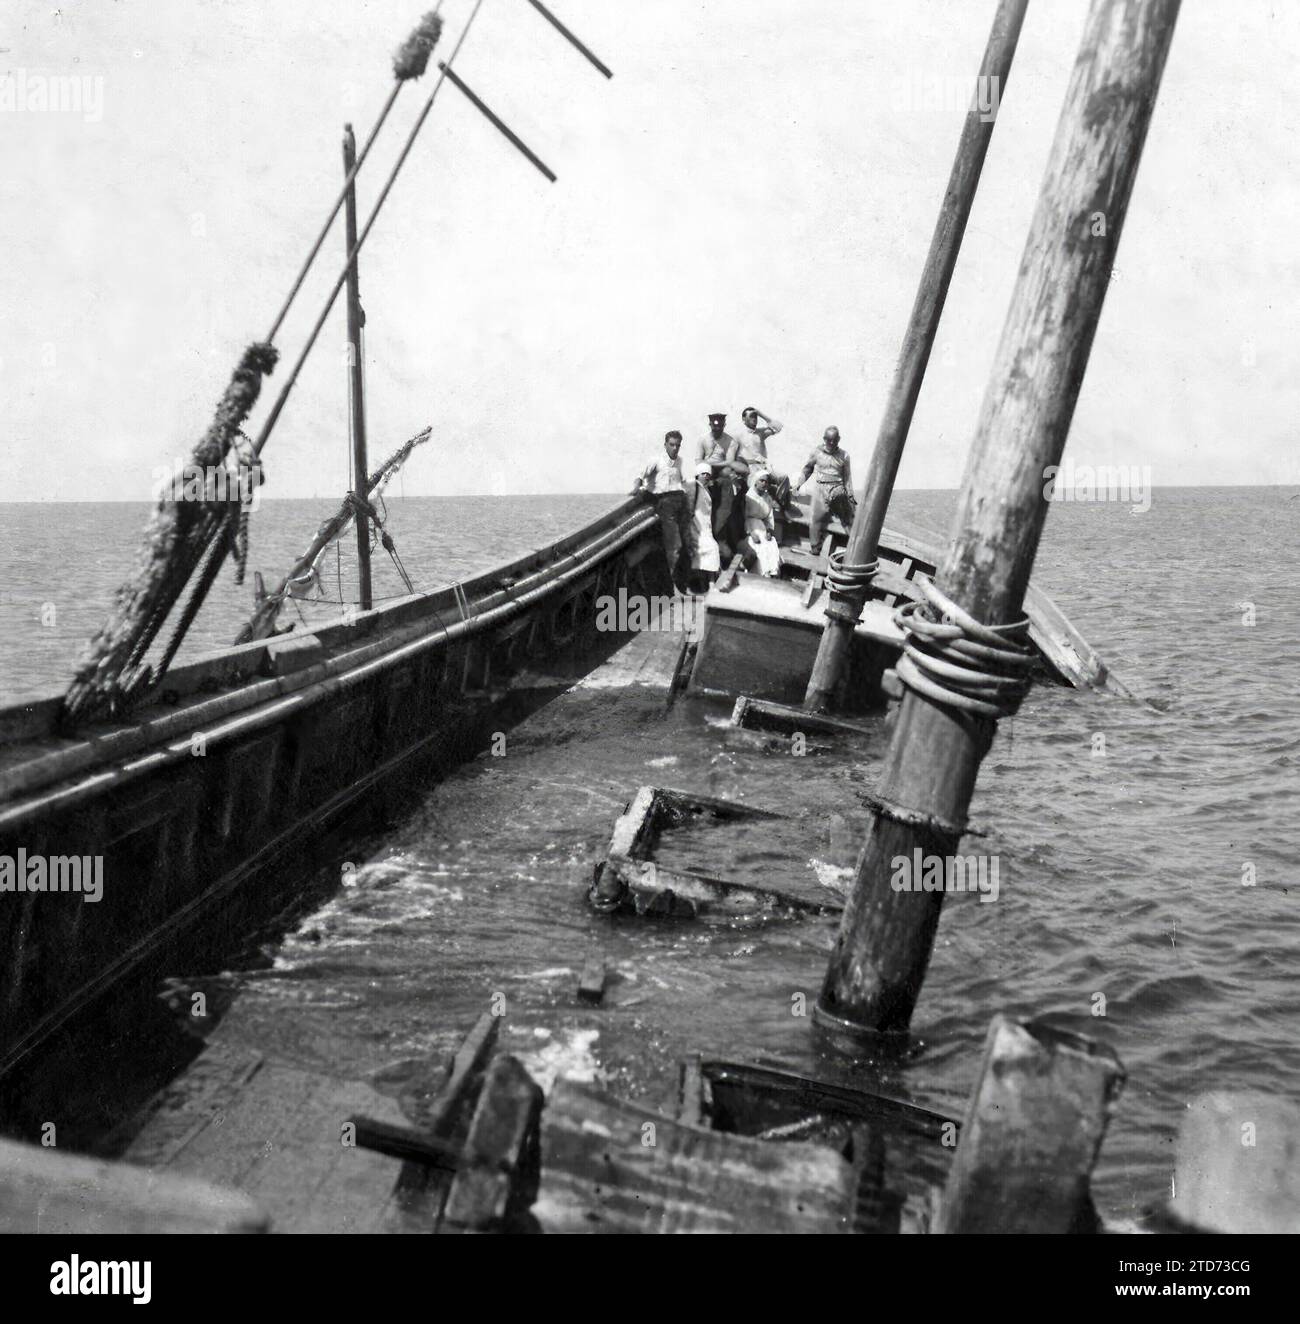 07/31/1918. In the Golas del Ebro. Current status of the 'Pailebot' 'Nicola P', stranded in that place and abandoned after fruitless work to float it. Photo: H. Vallvé. Credit: Album / Archivo ABC / H. Vallvé Stock Photo